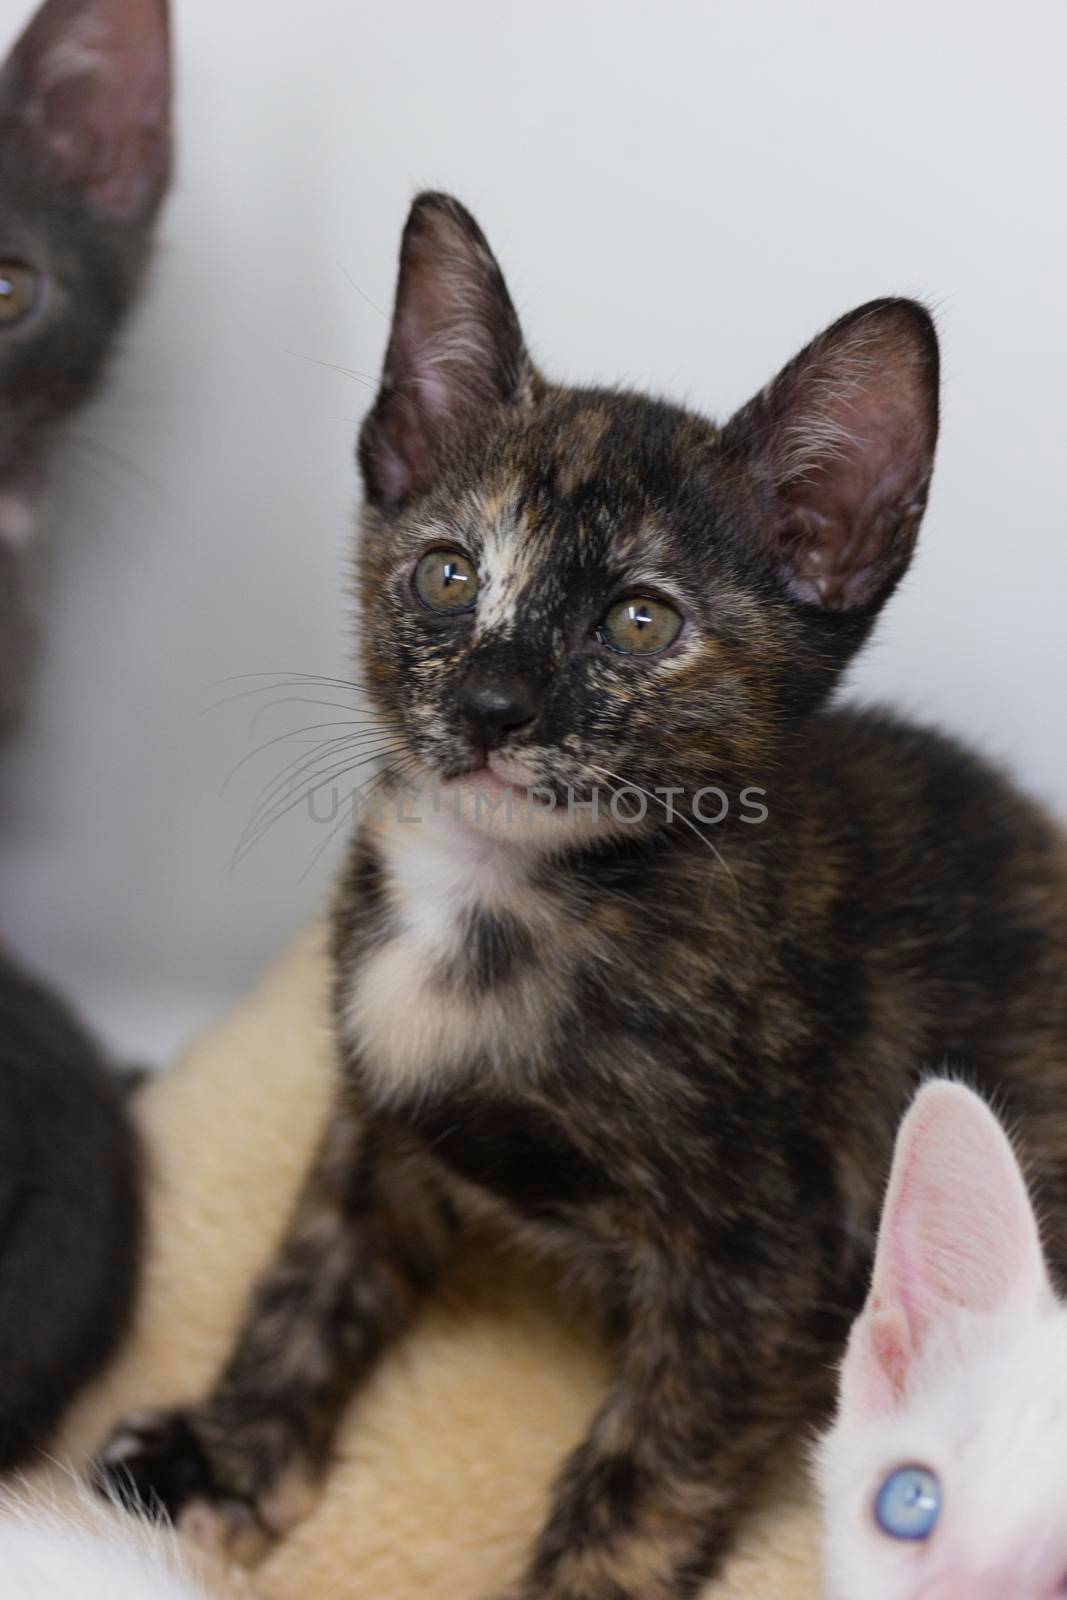 Multicolored kittens Khao Manee breed with white background, looks